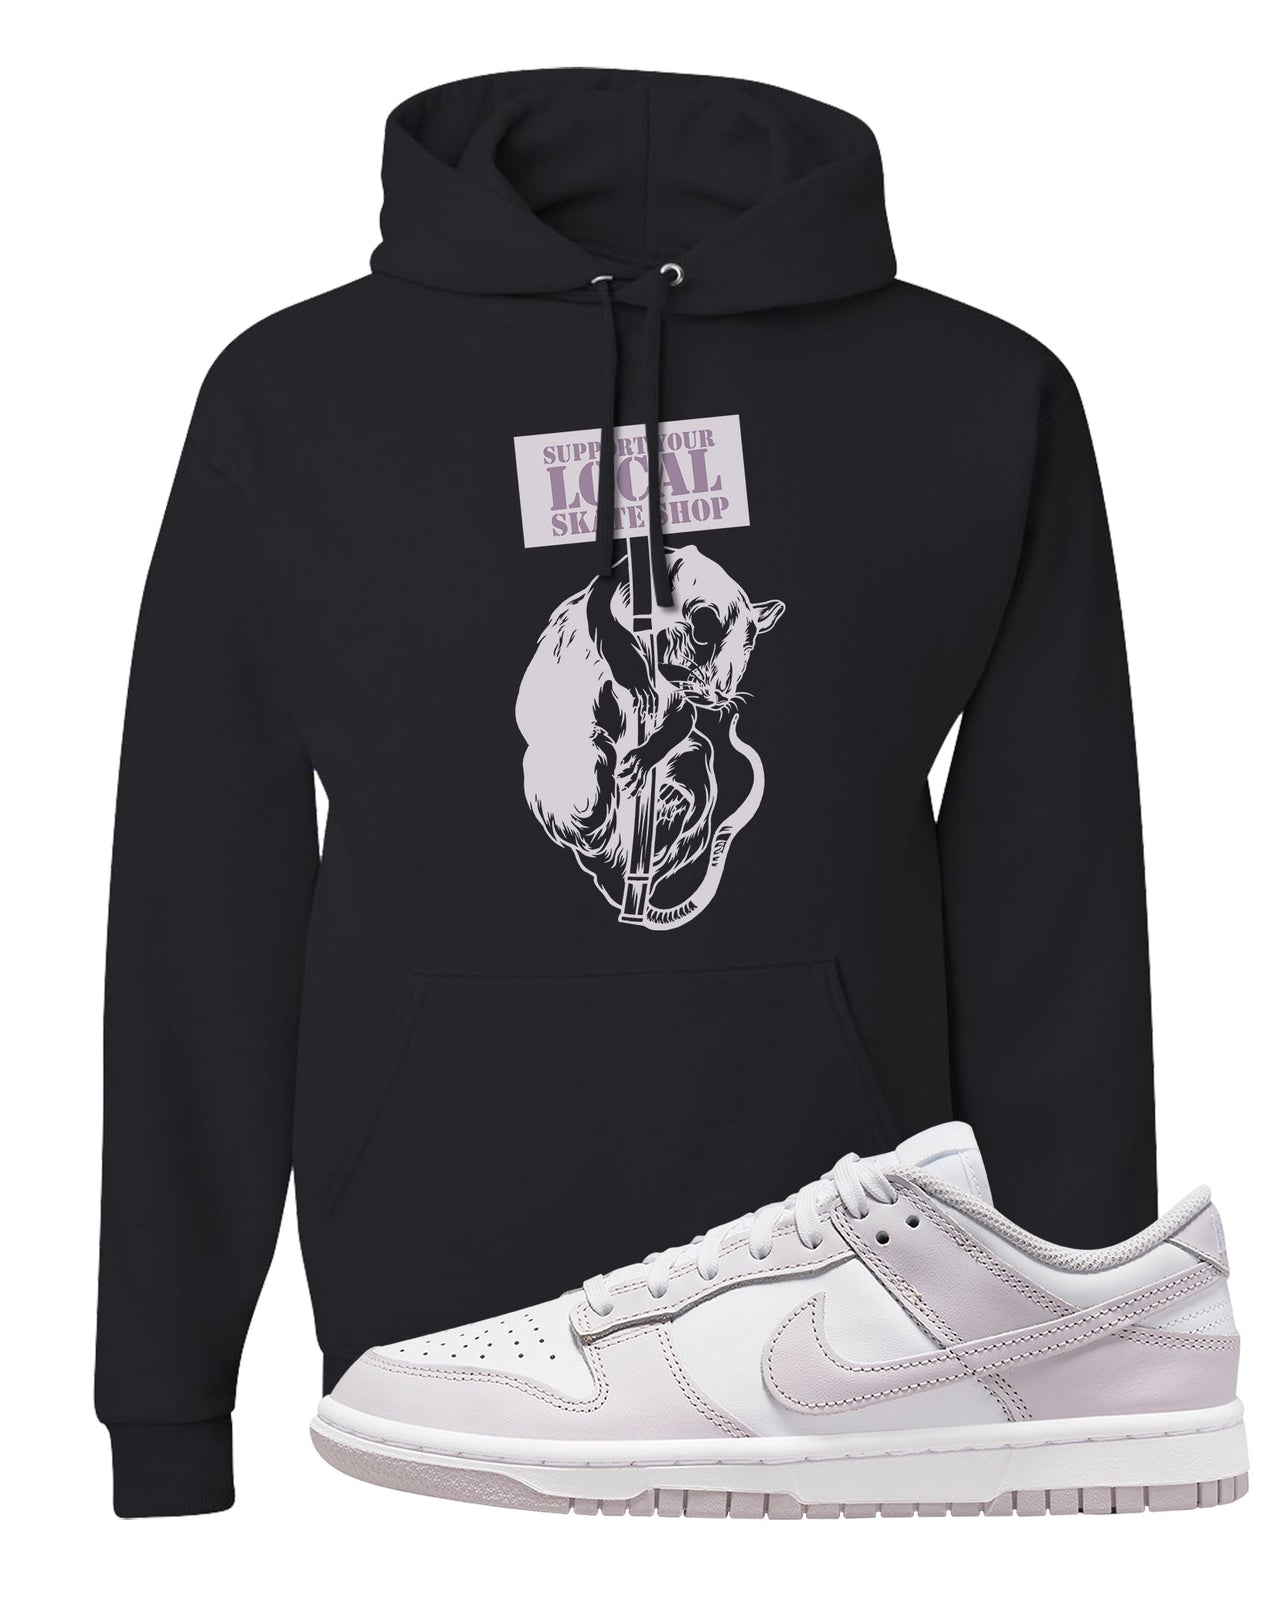 Venice Low Dunks Hoodie | Support Your Local Skate Shop, Black